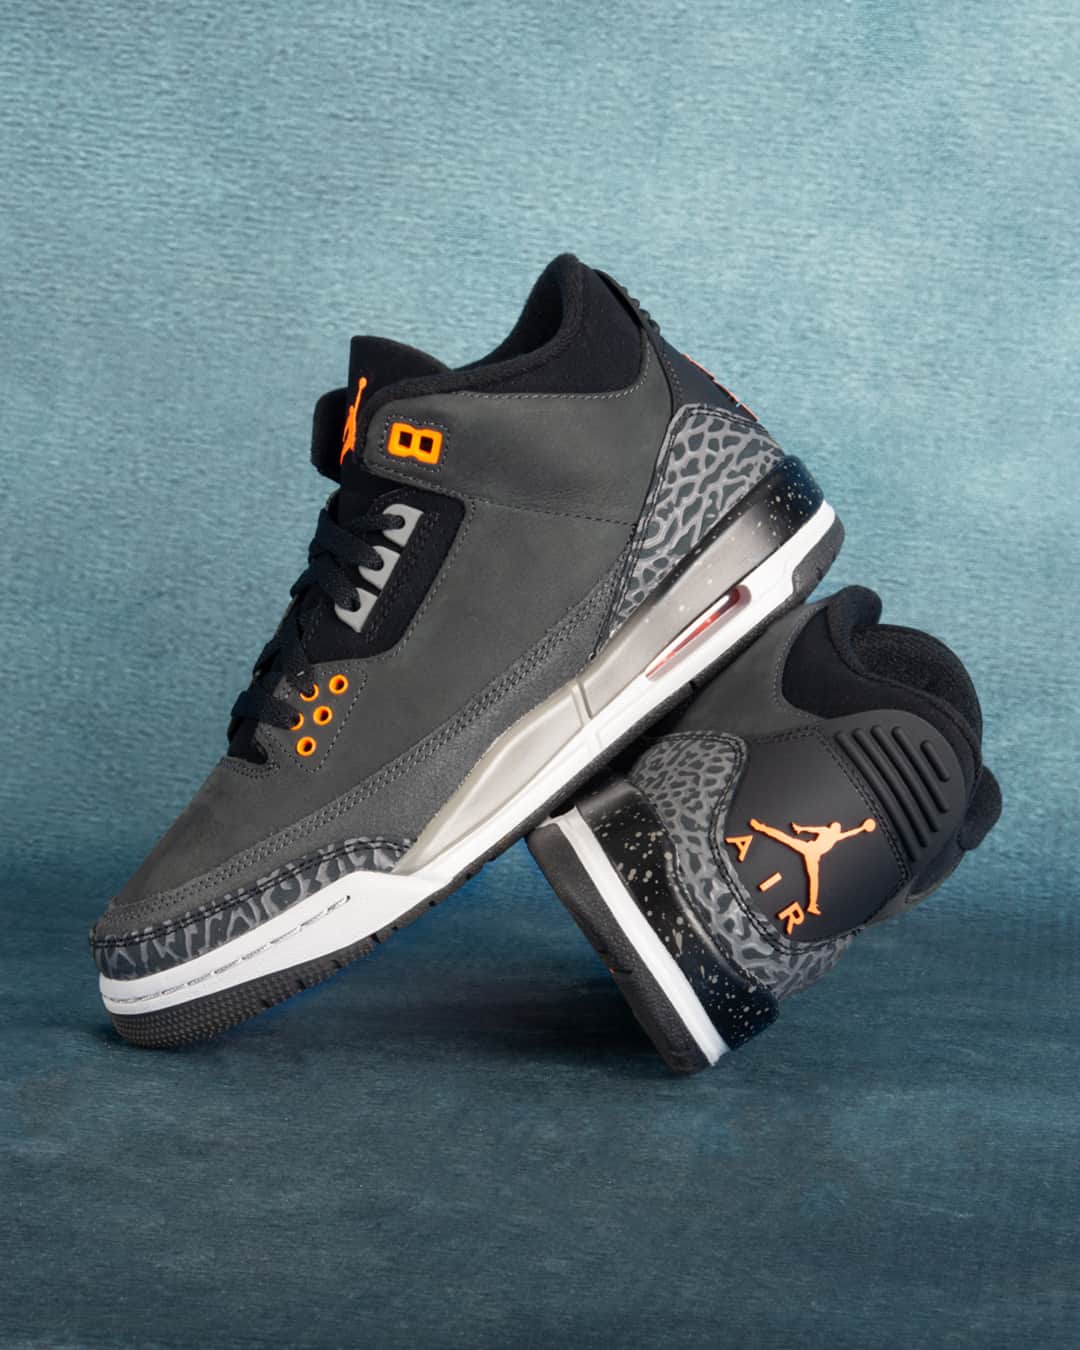 Foot Lockerのインスタグラム：「Approach with caution ⚠️   The Jordan Retro 3 'Fear' is launching 11/25 in full family sizing.  Reserve your pair now in the Foot Locker app」